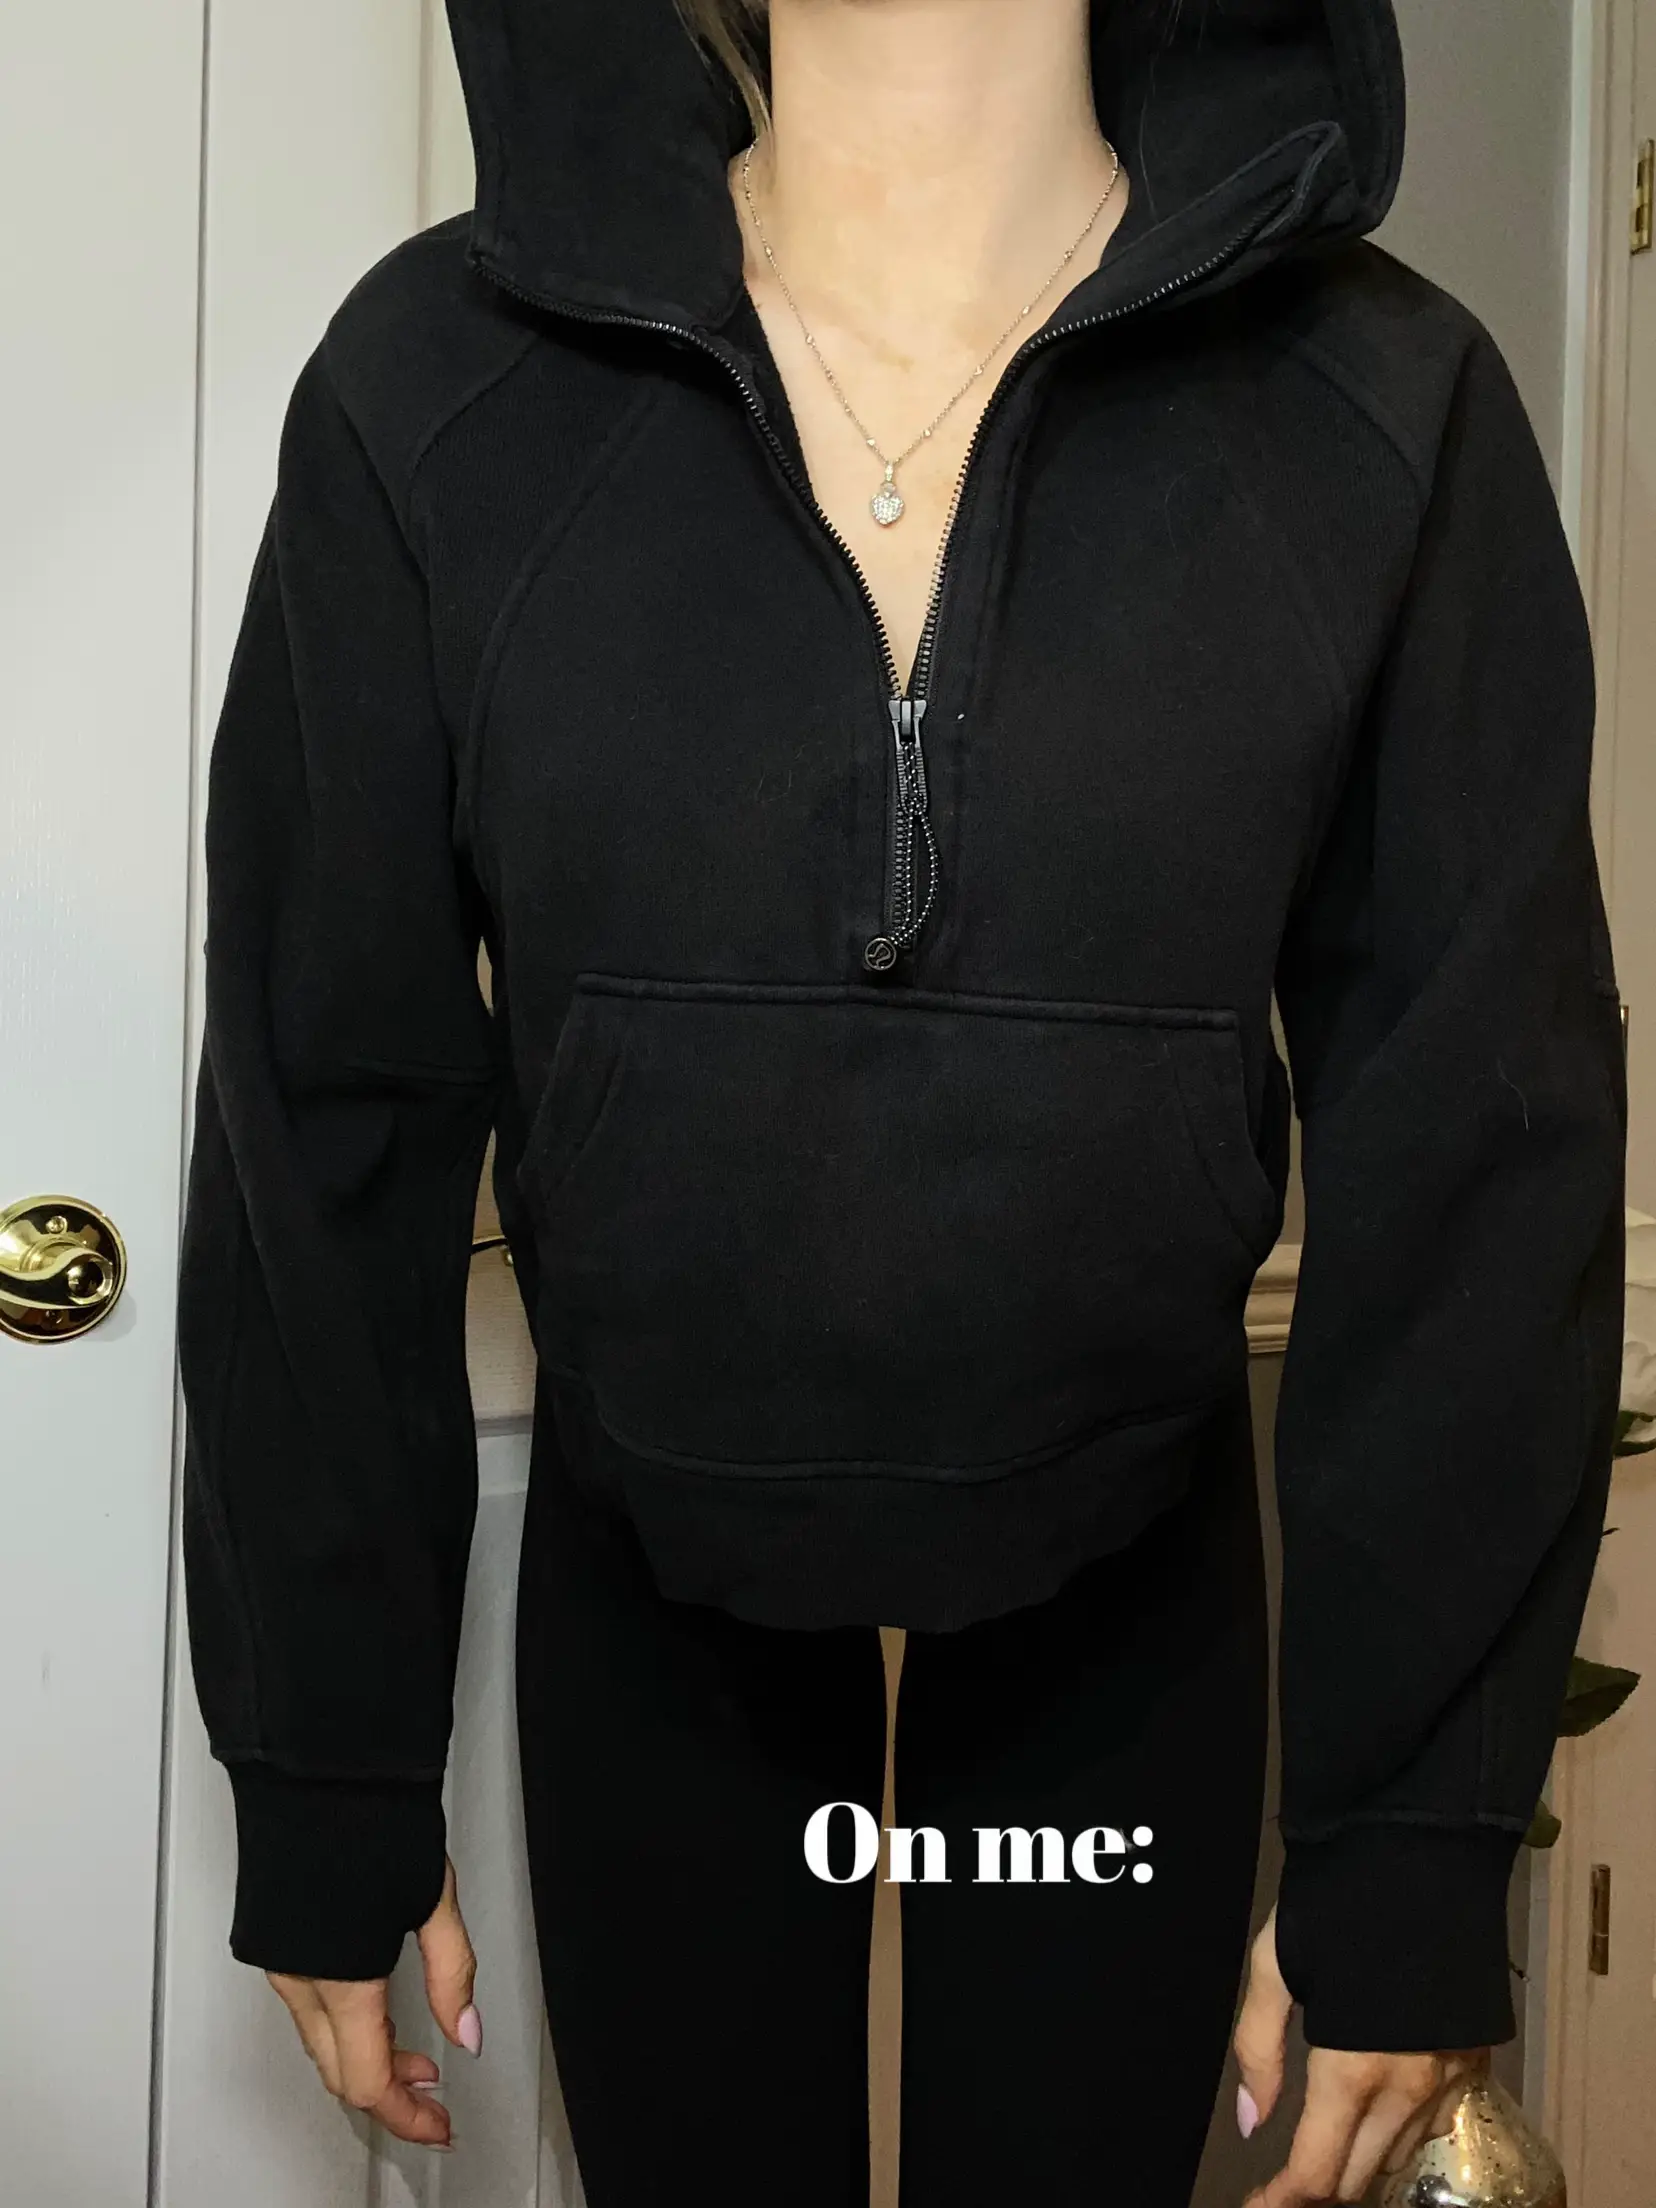 USA] Scuba Full Zip Cropped Hoodie is finally out online! : r